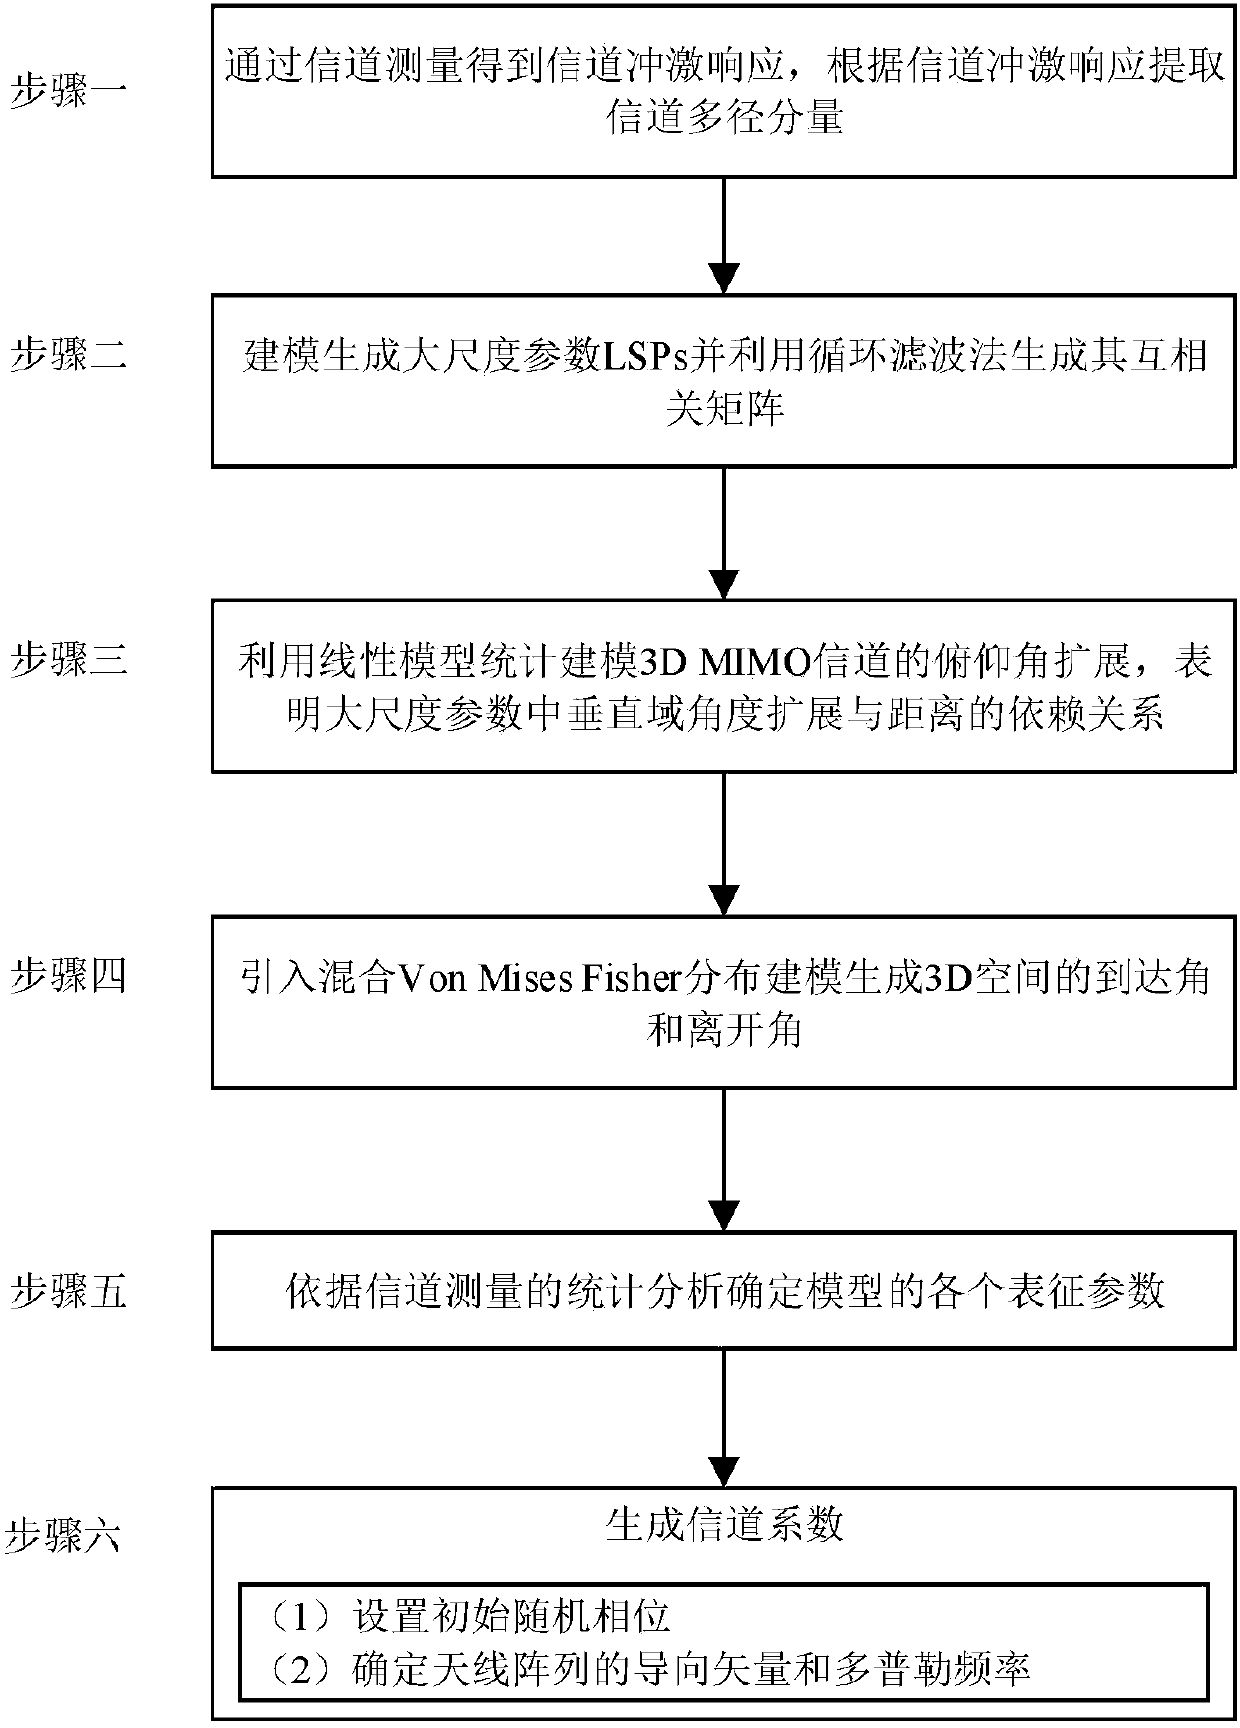 3D MIMO (Three-dimensional Multiple Input Multiple Output) statistical channel modeling method based on actual measurement